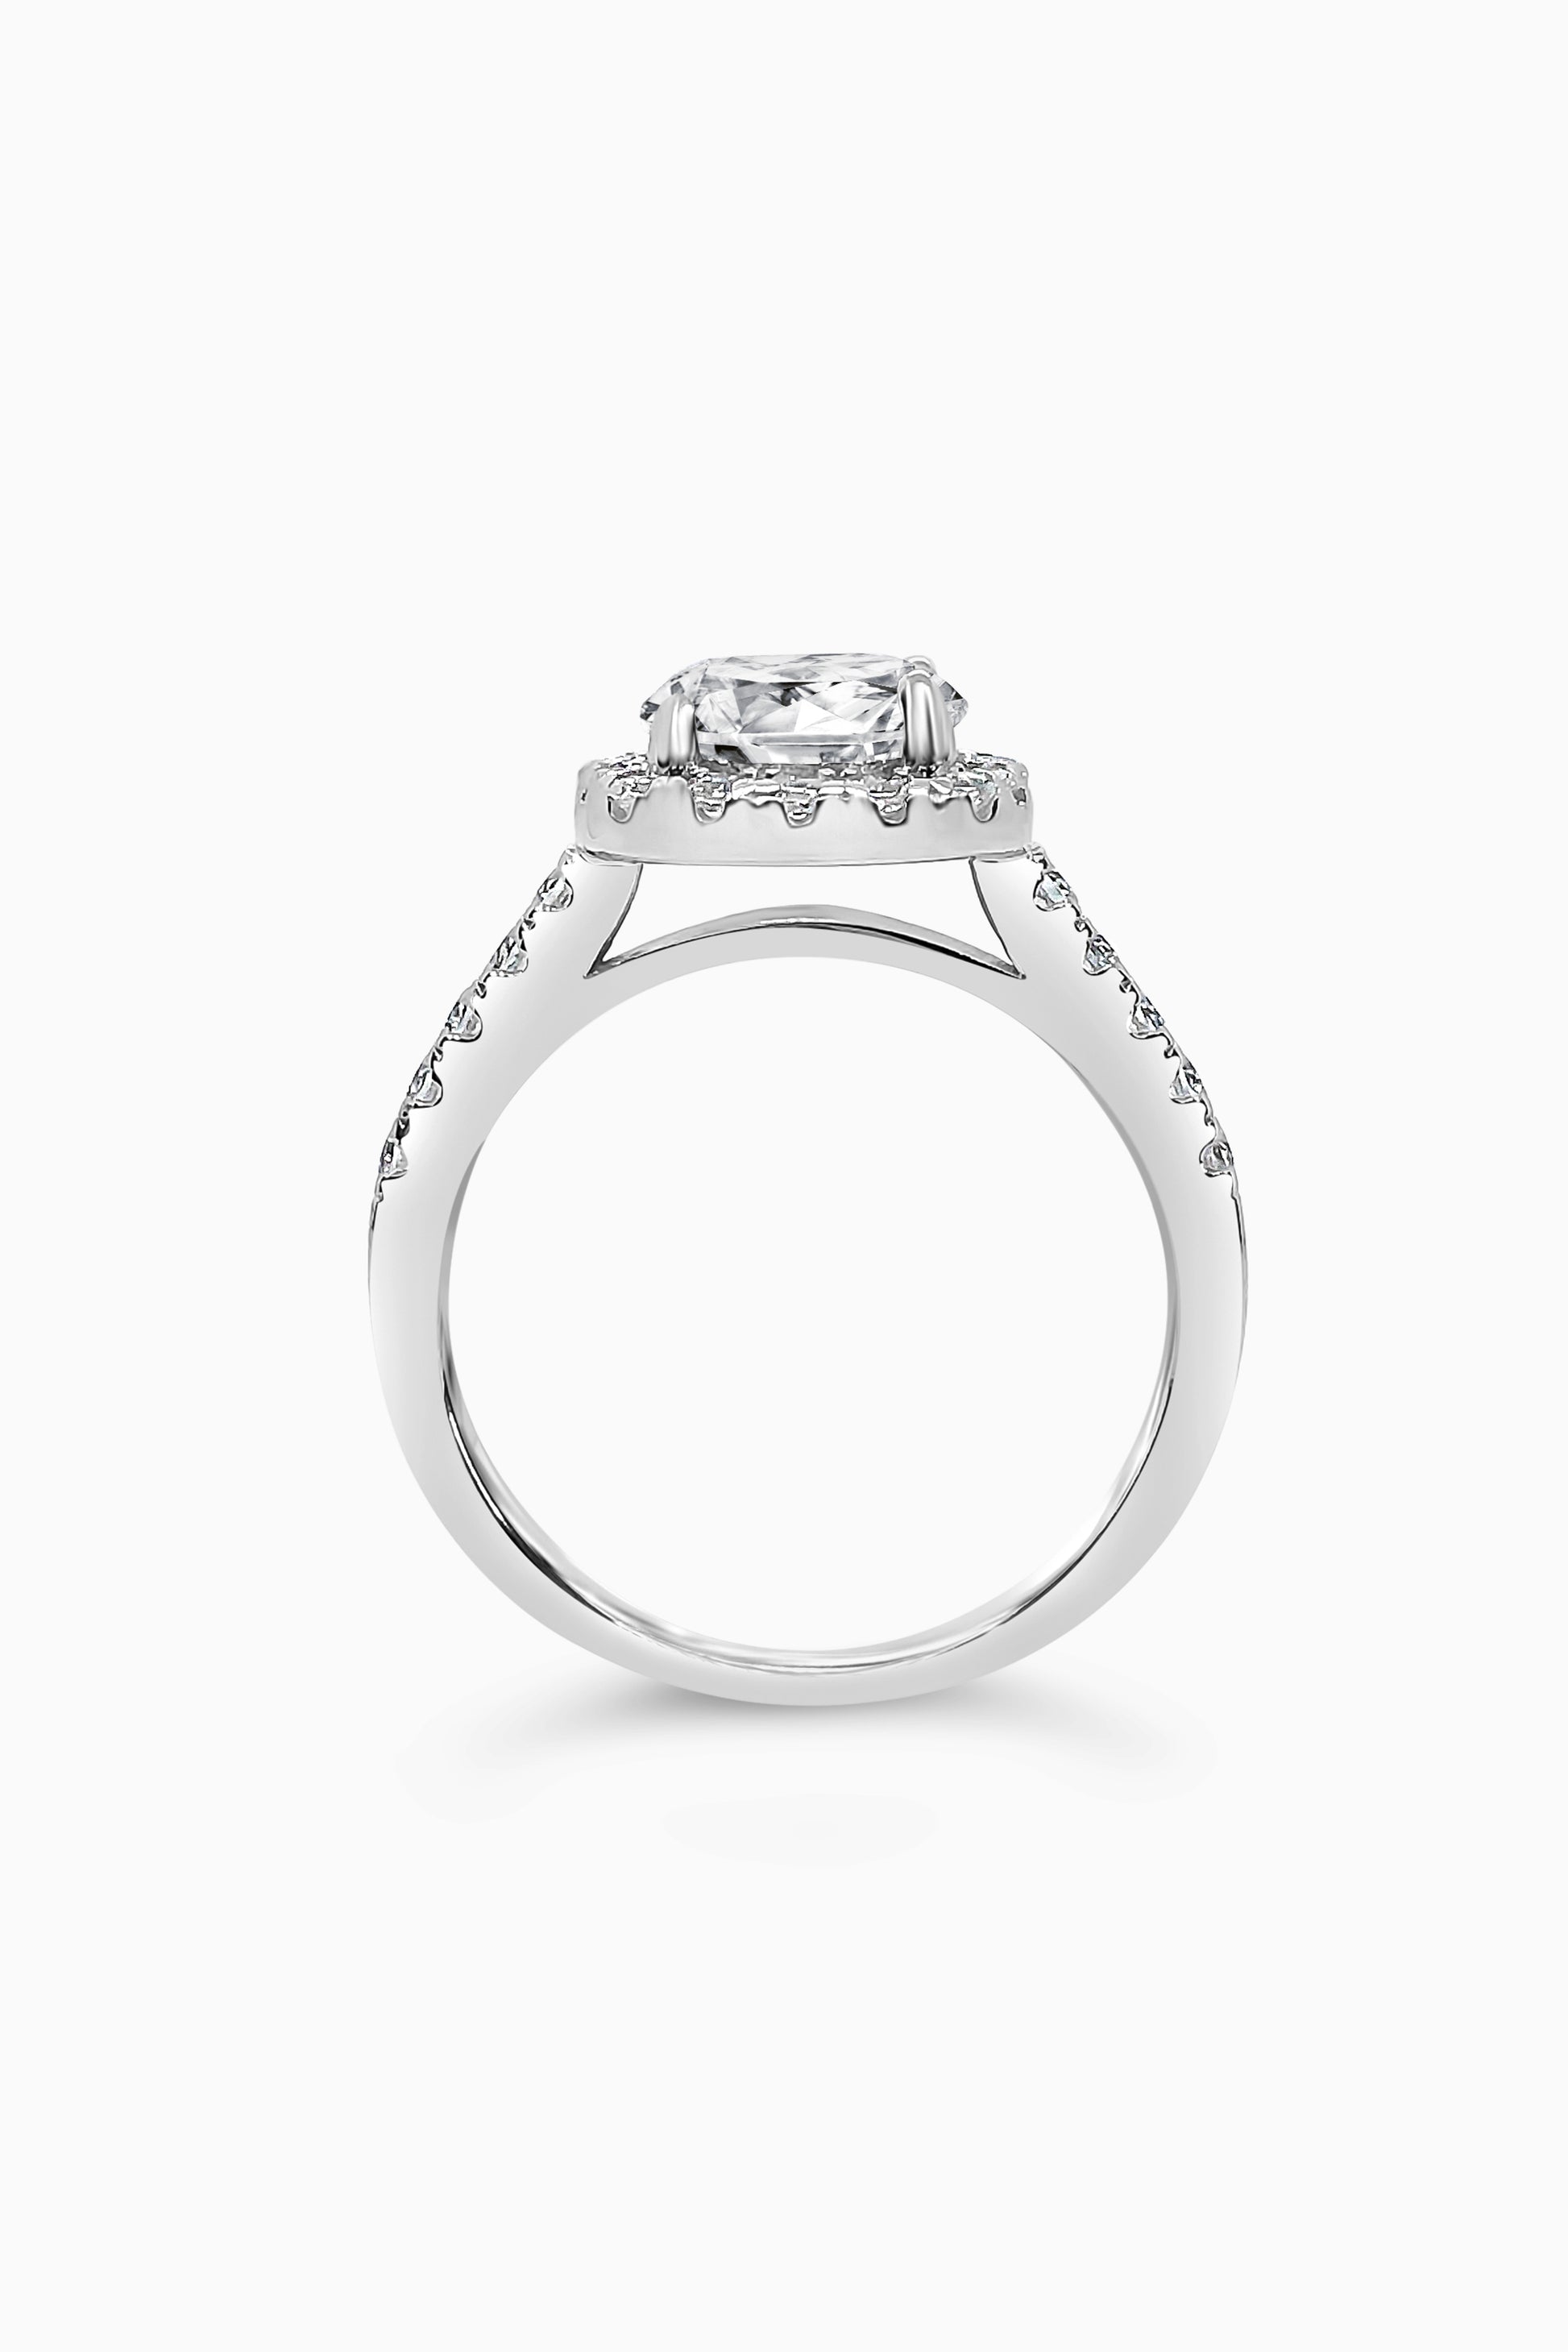 White Gold round cut stone surrounded by a Square Halo and Pavé band - Side View